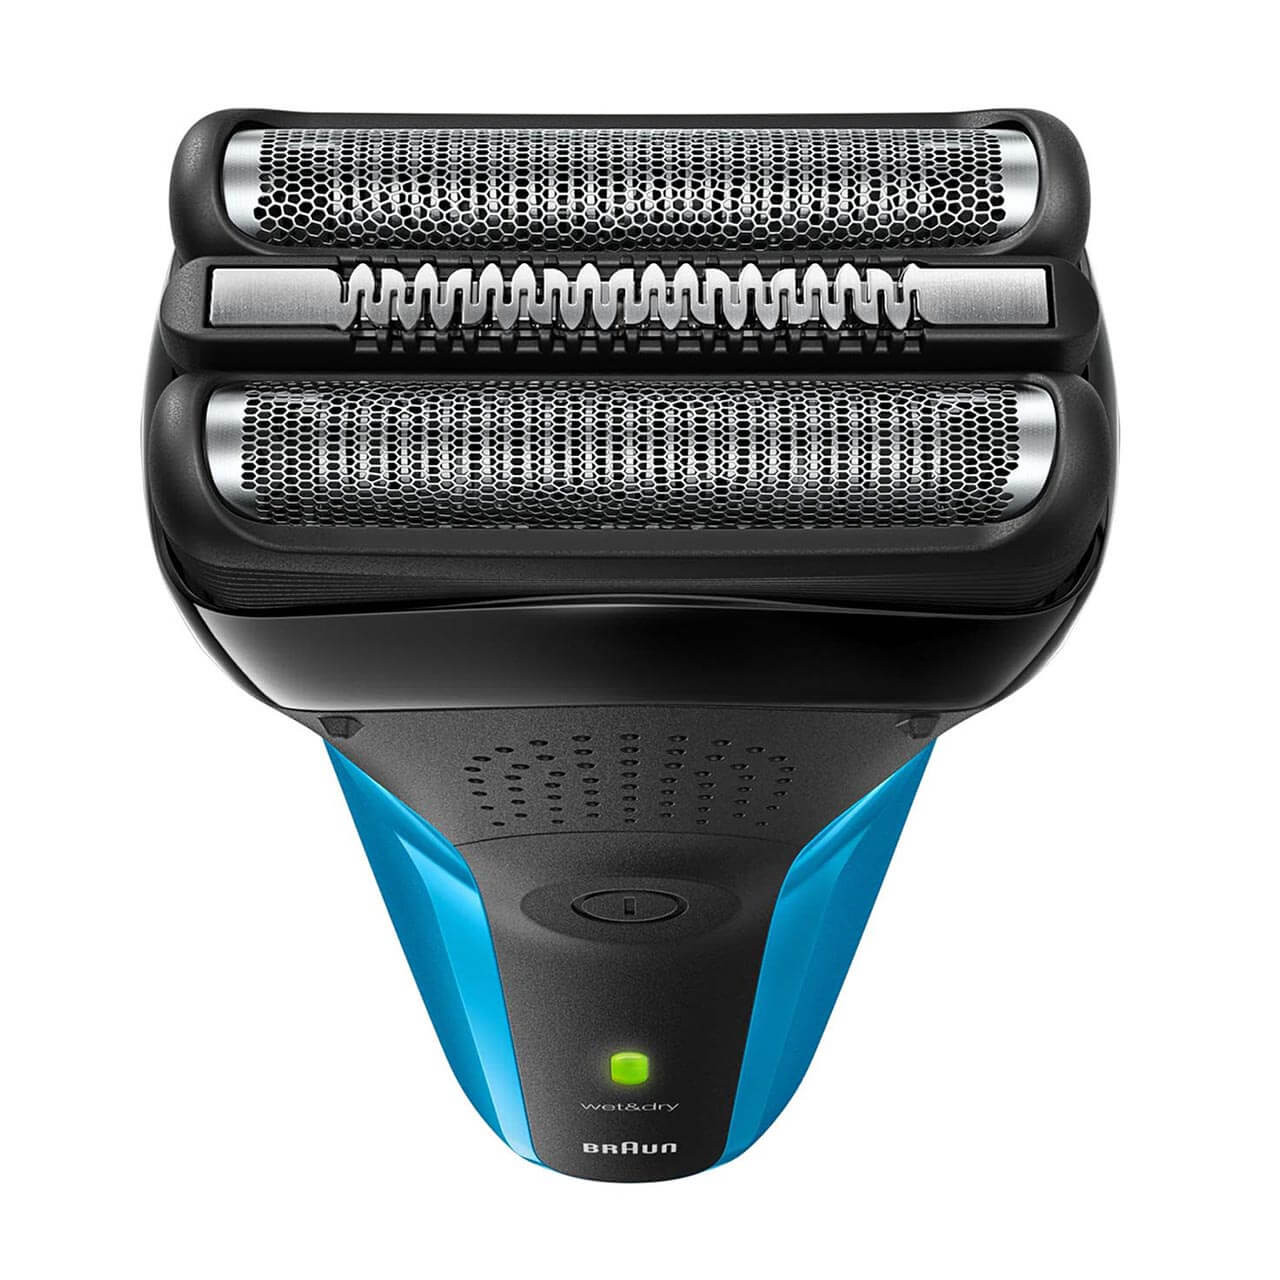 Braun Series 3 Razor Head - health and beauty - by owner